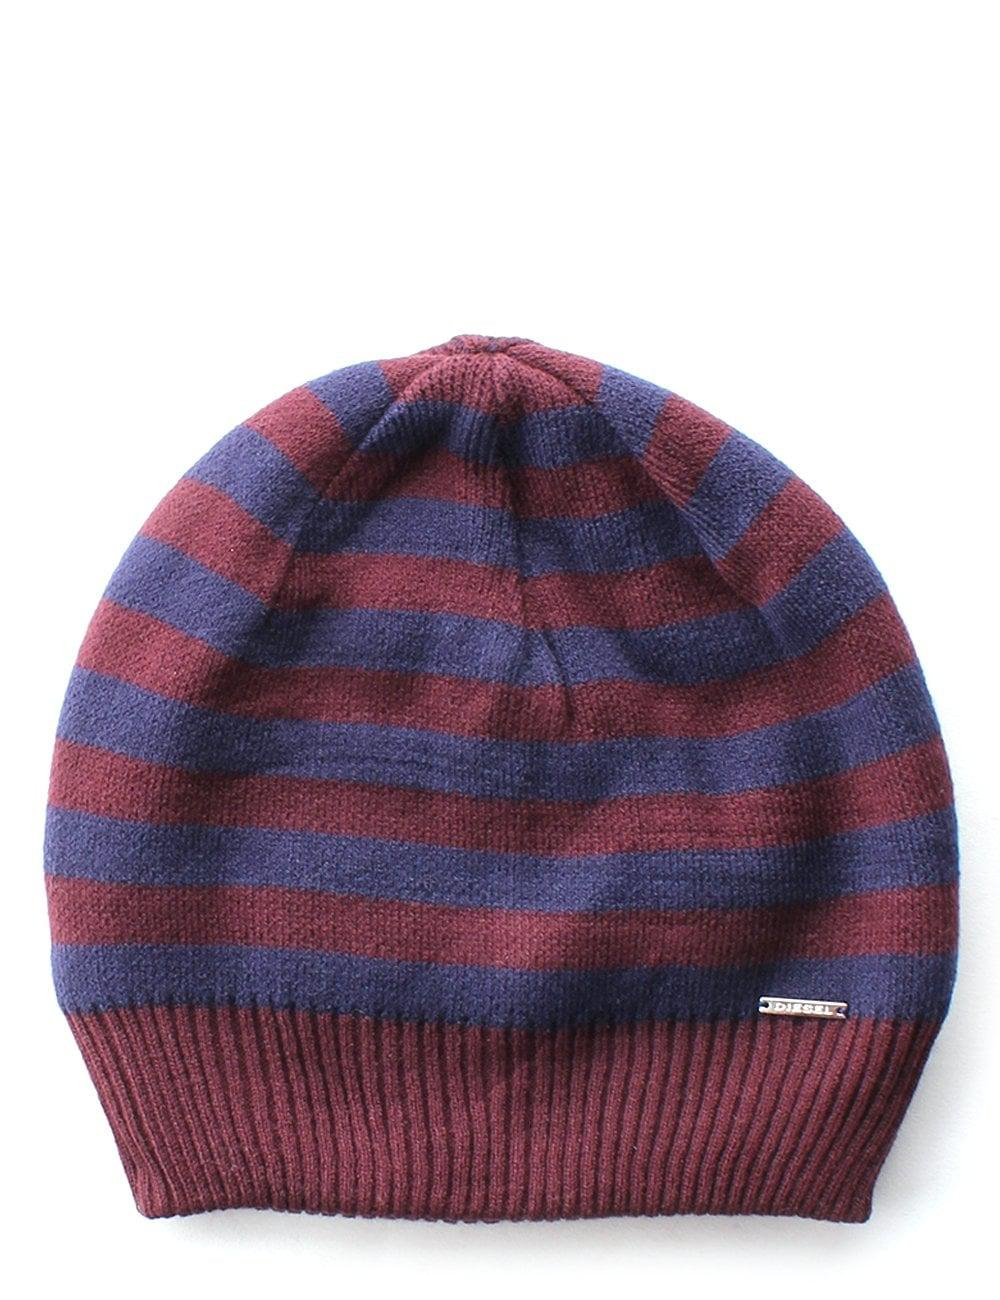 Knitted Mens Hat Patterns Mens Striped Knitted Hat Pattern